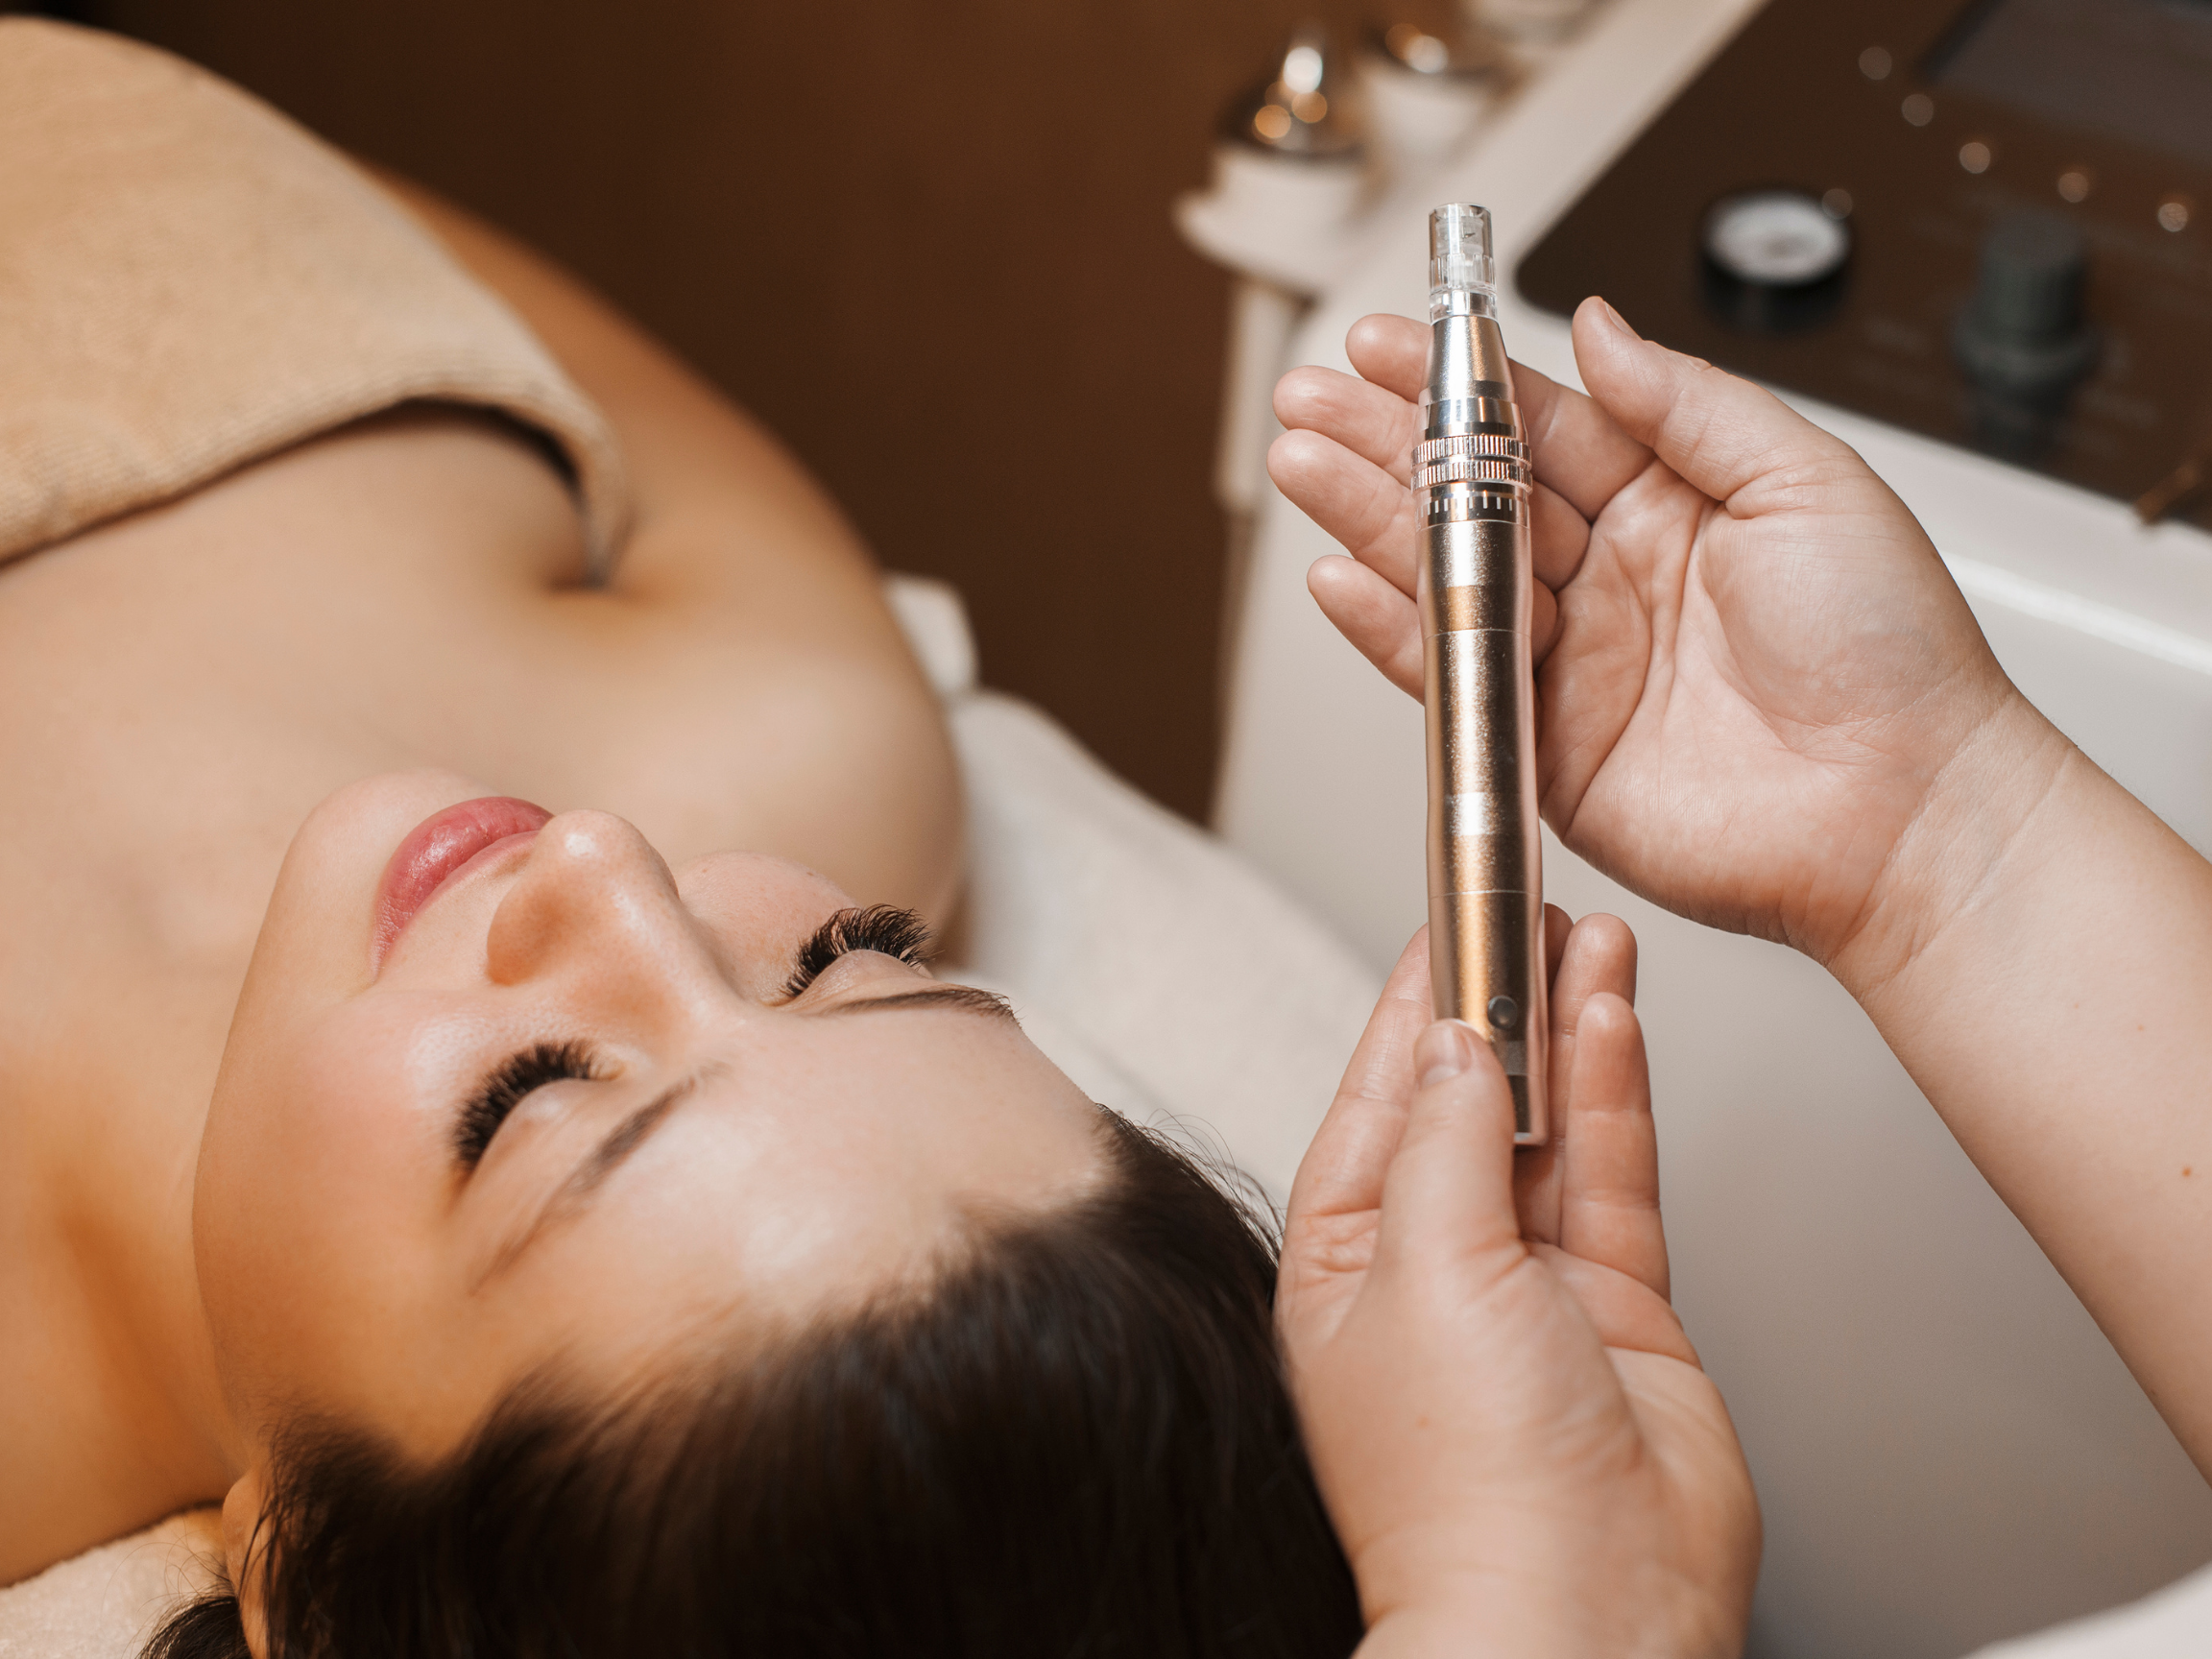 top view of cosmetologist's hands holding a Dermapen for microneedling procedure on a woman's face, who is leaning on a bed with closed eyes